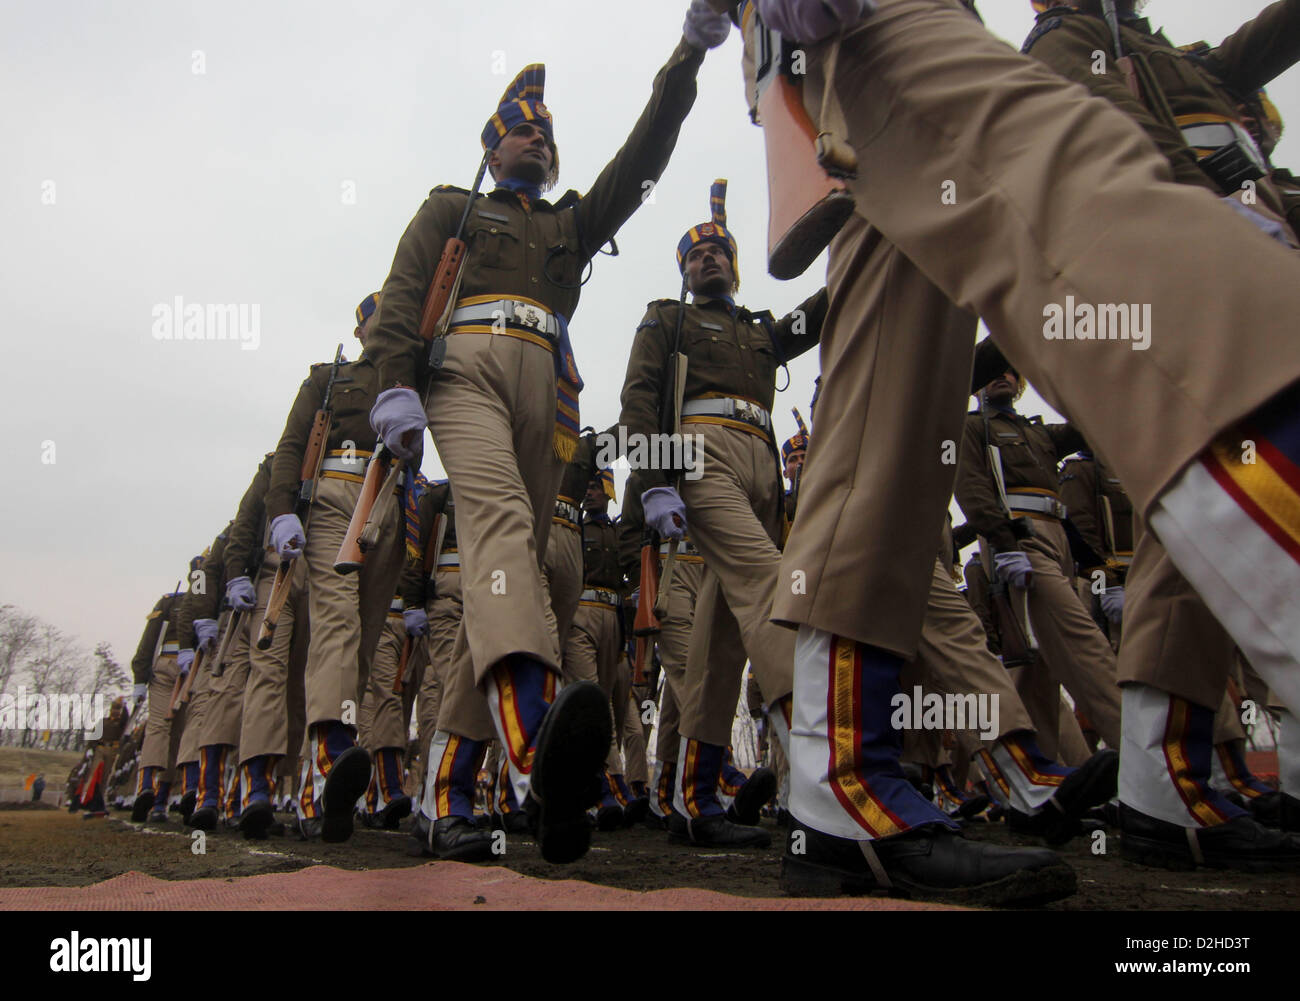 Jan. 24, 2013 - Kashmir, India - Indian policemen march during Indian Republic Day parade dress rehearsals at Bakshi Stadium.  The Republic Day Parade is on January 26 and marks the adoption of the constitution of India and the transition from a British Domination into a Republic. (Credit Image: © Altaf Zargar/ZUMAPRESS.com) Stock Photo